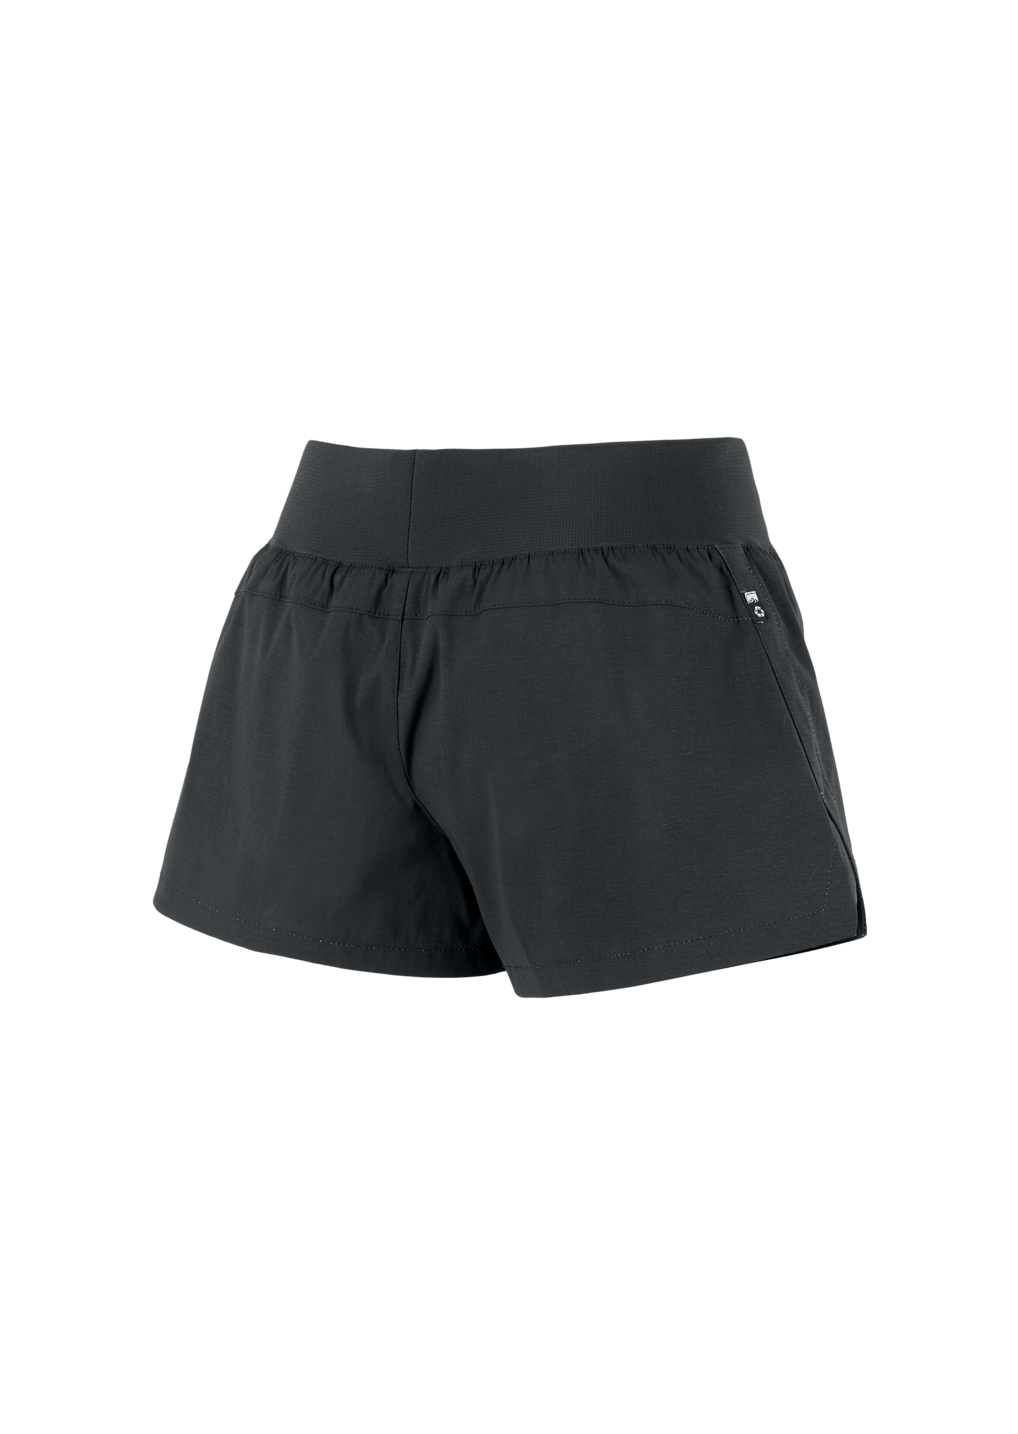 Picture Organic W's Arane Shorts - Recycled Polyester Black Pants